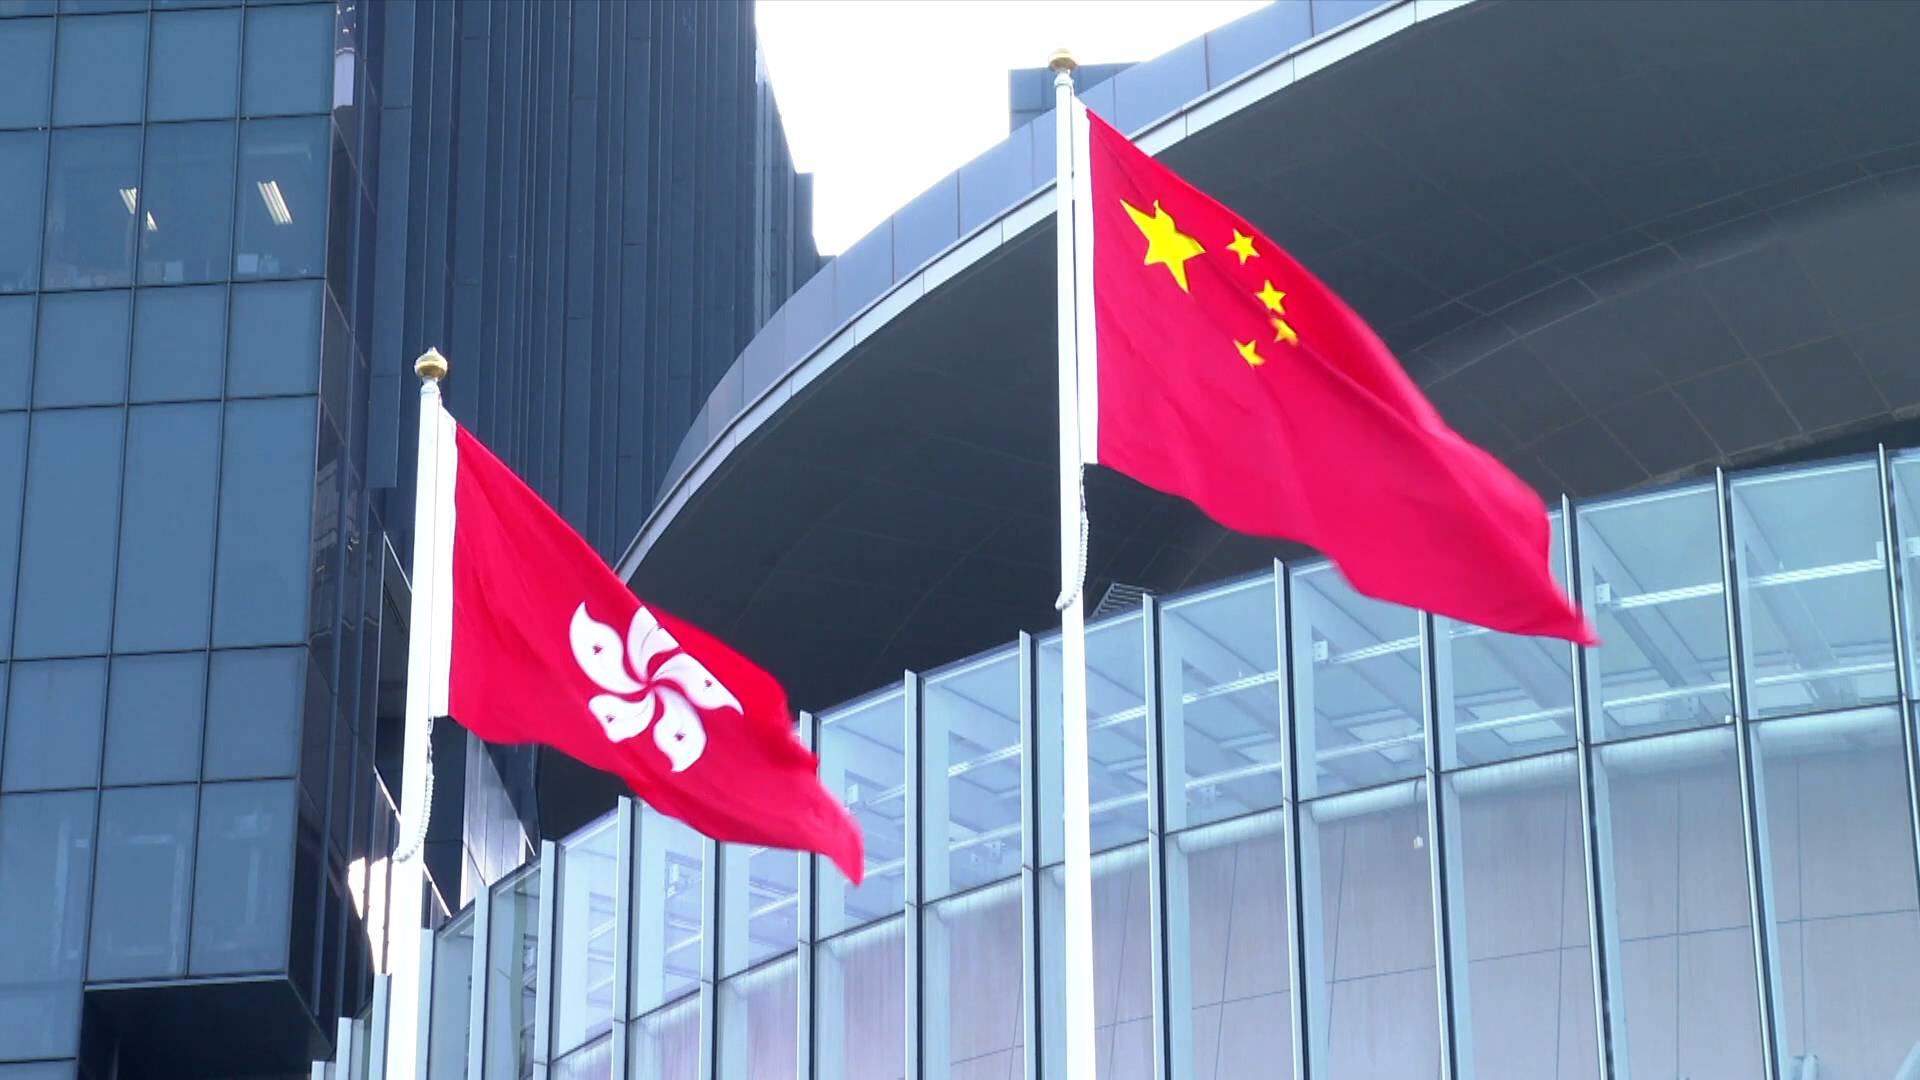 GLOBALink | China issues white paper on HK's democratic progress under framework of "one country, two systems"